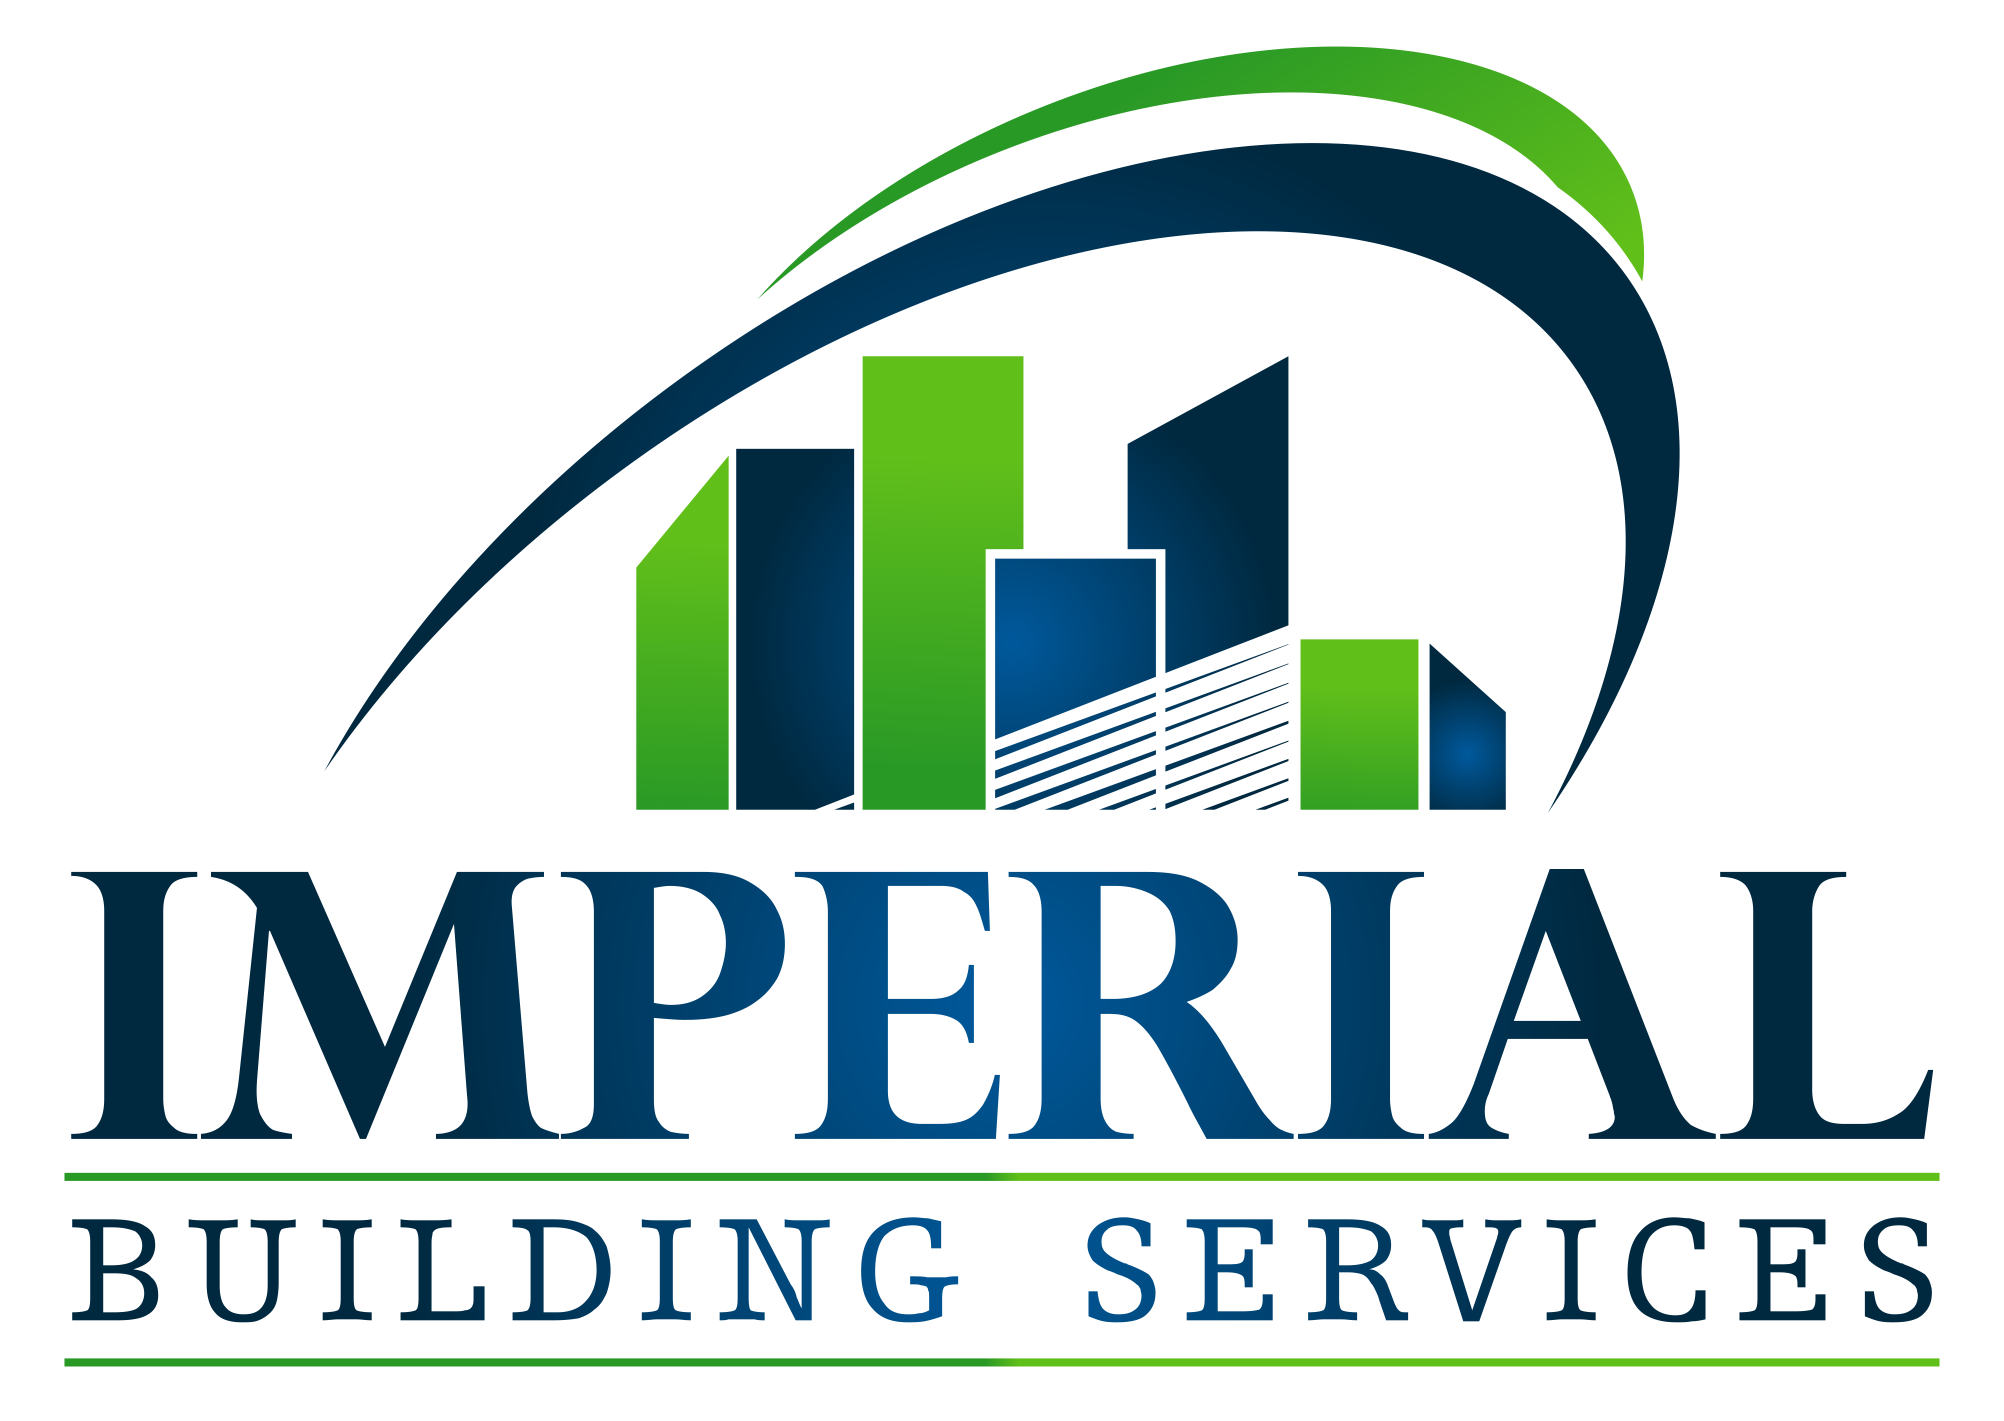 Imperial Building Services